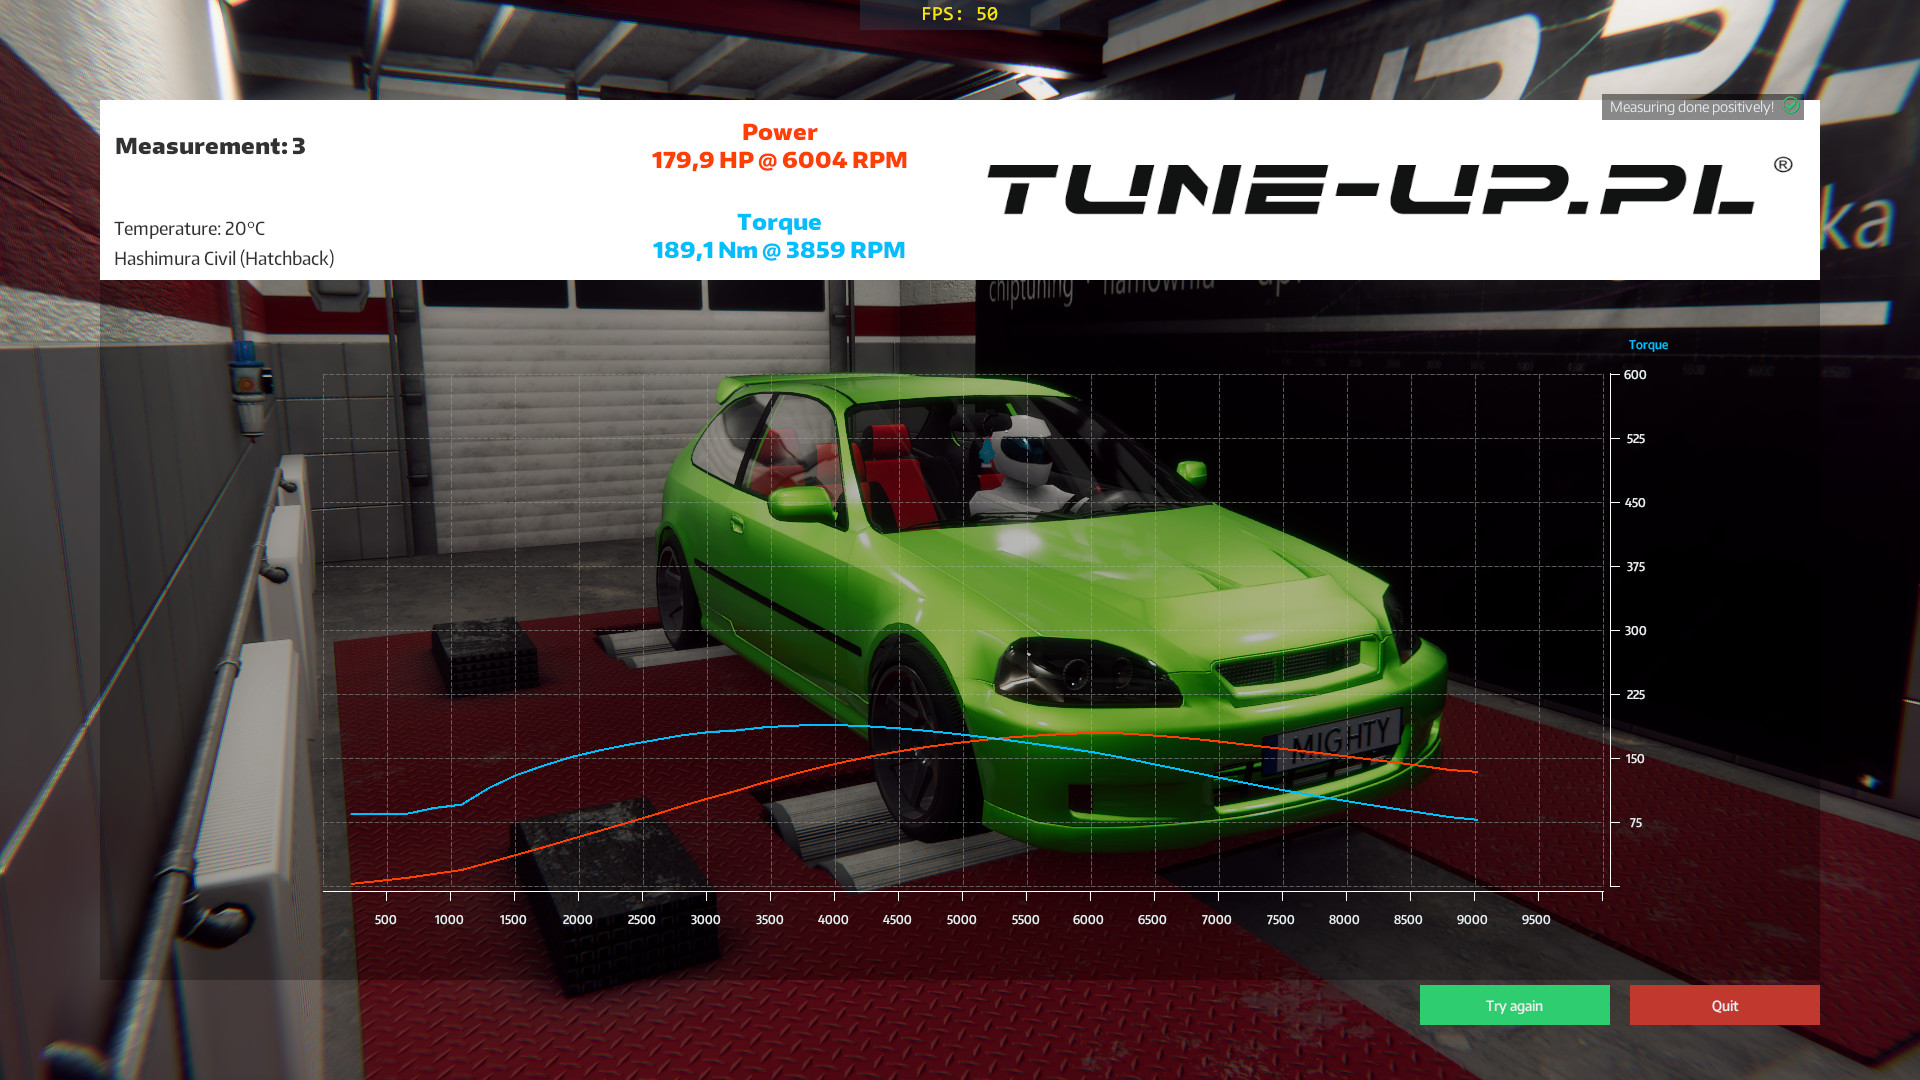 CAR TUNE: Project on Steam